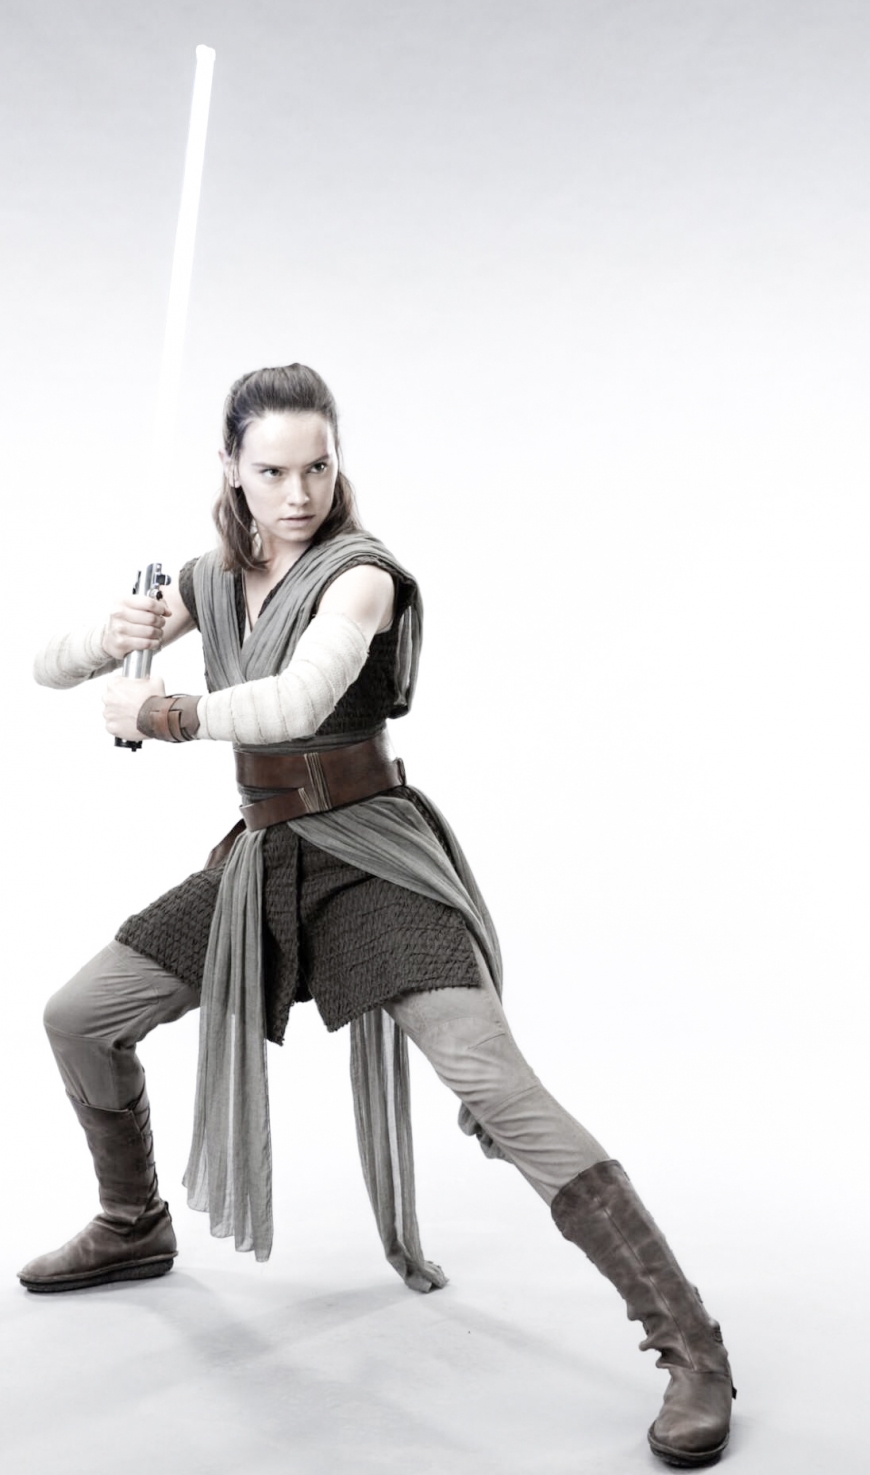 Star Wars The Last Jedi new characters images